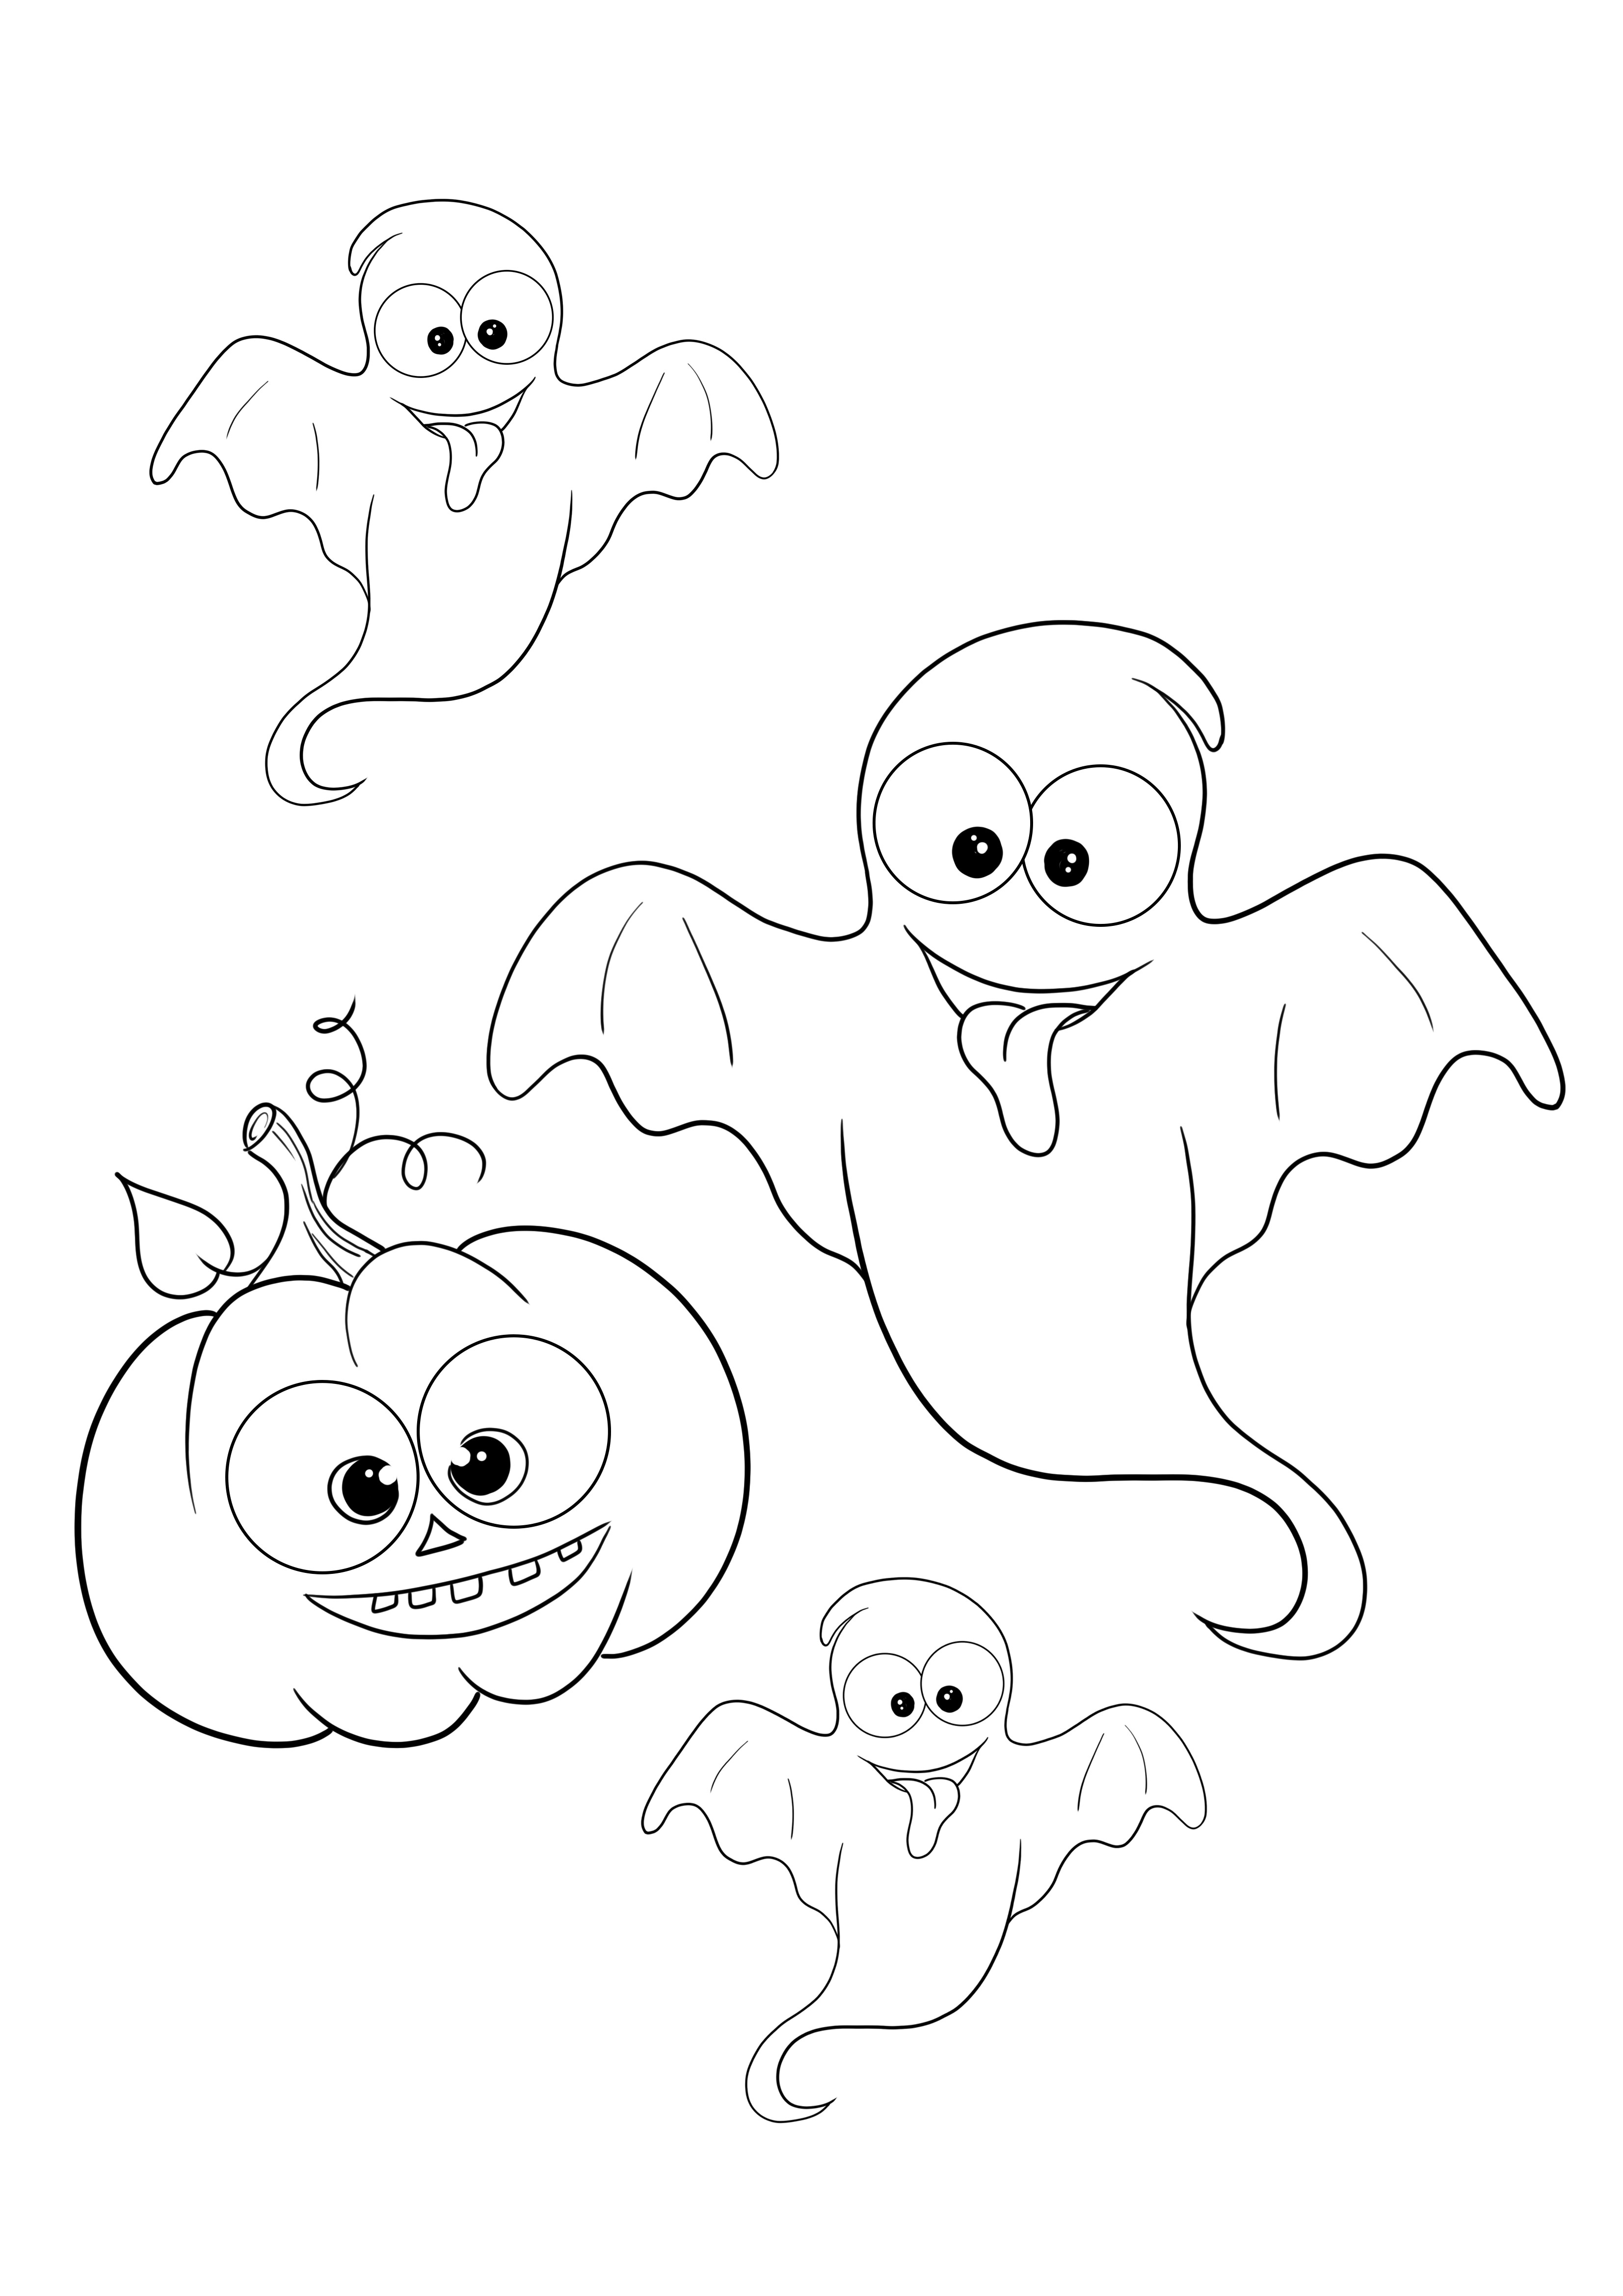 Spooky Halloween ghosts to color and print for free